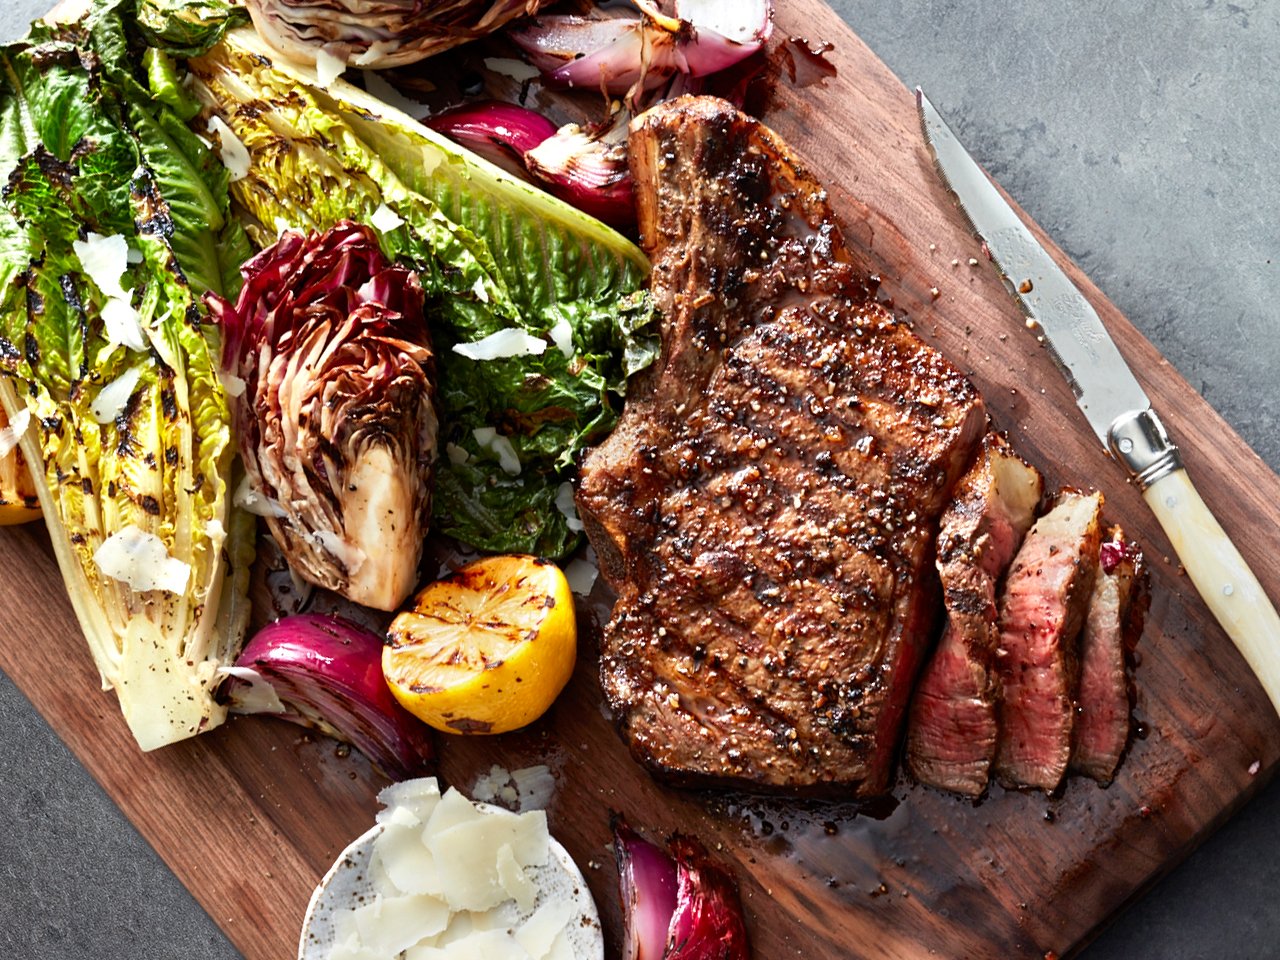 Long weekend barbecue recipe: Grilled steak recipe with caesar salad